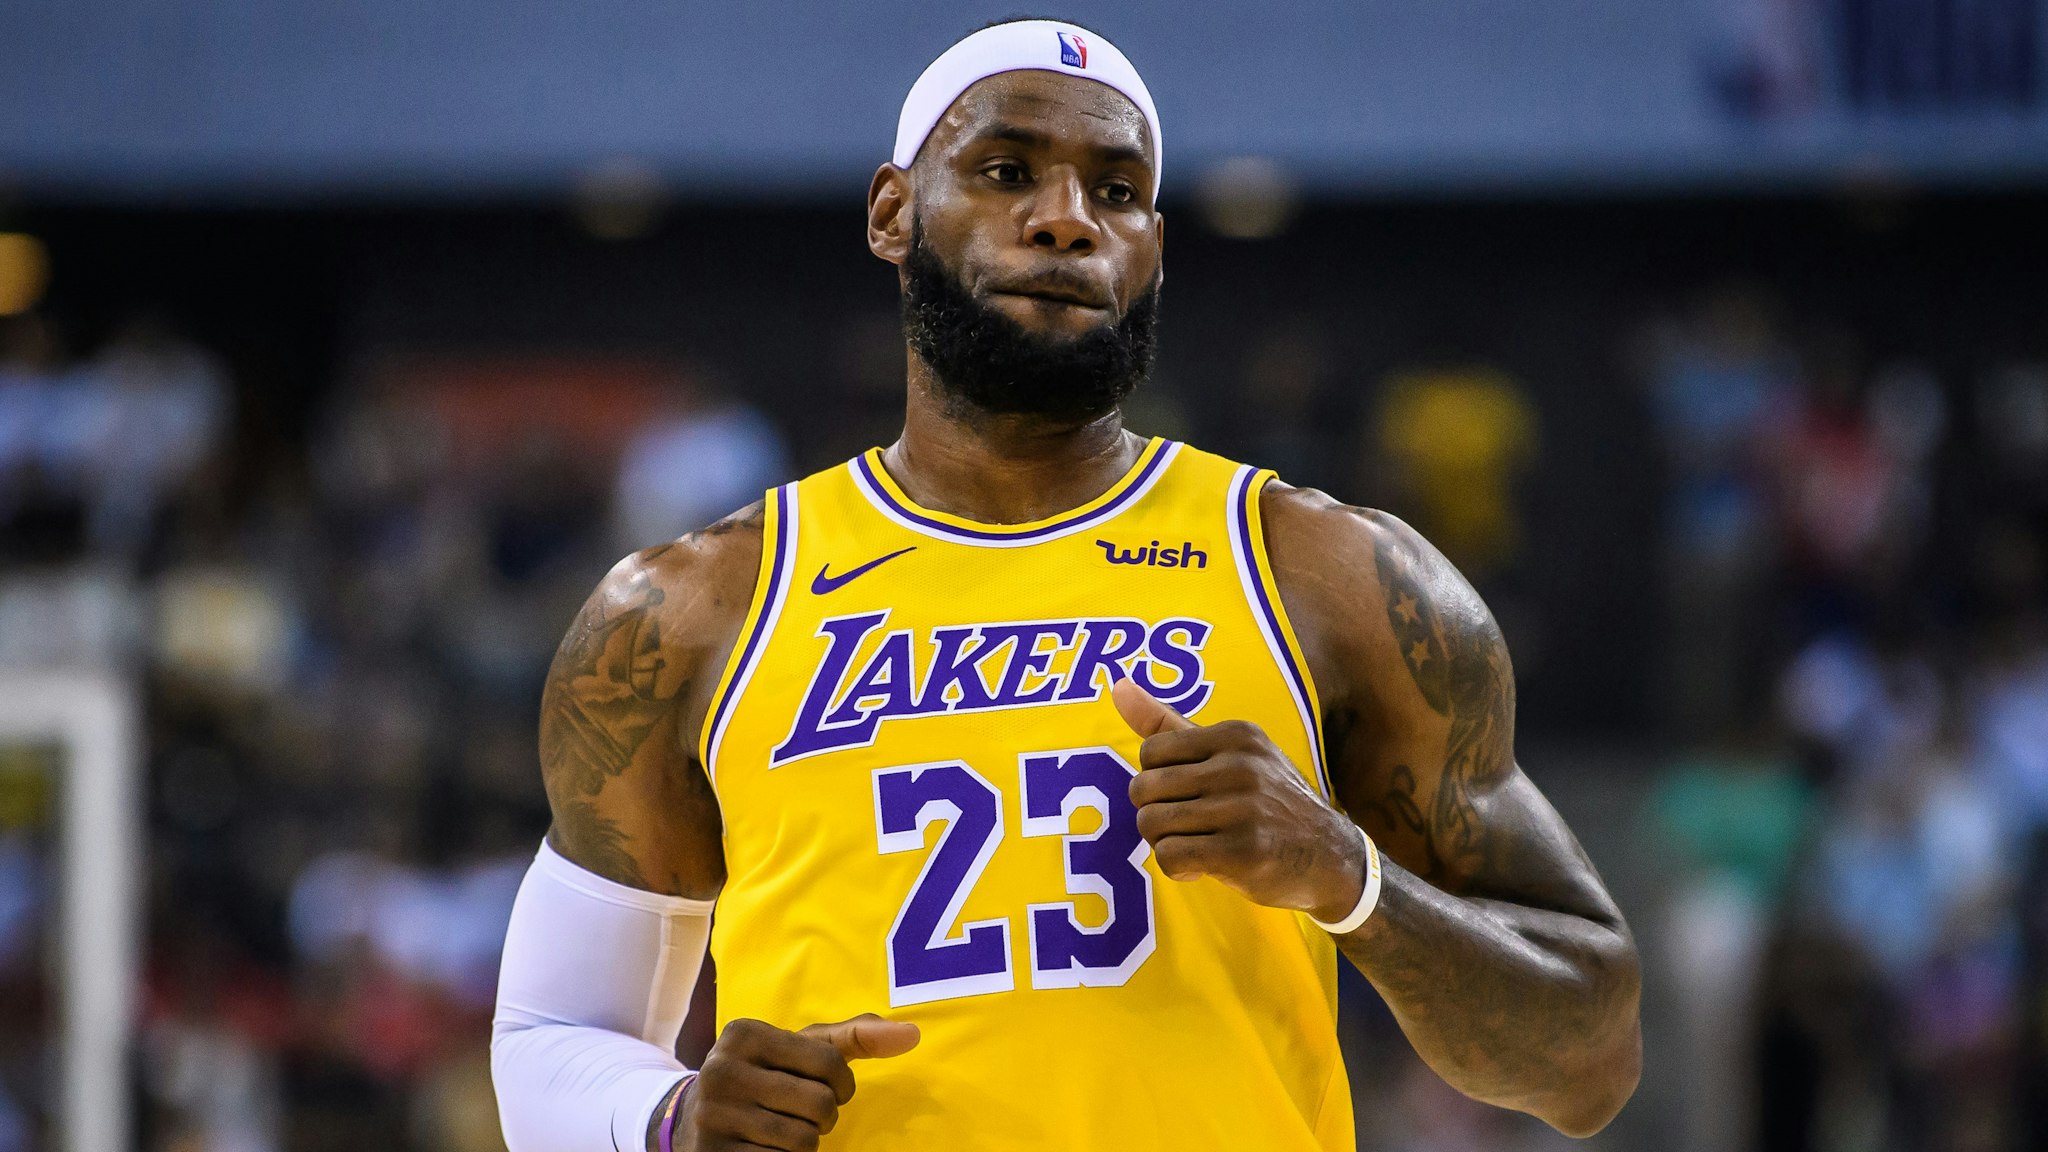 #23 Lebron James of the Los Angeles Lakers reacts during a preseason game as part of 2019 NBA Global Games China at Shenzhen Universiade Center on October 12, 2019 in Shenzhen, Guangdong, China.